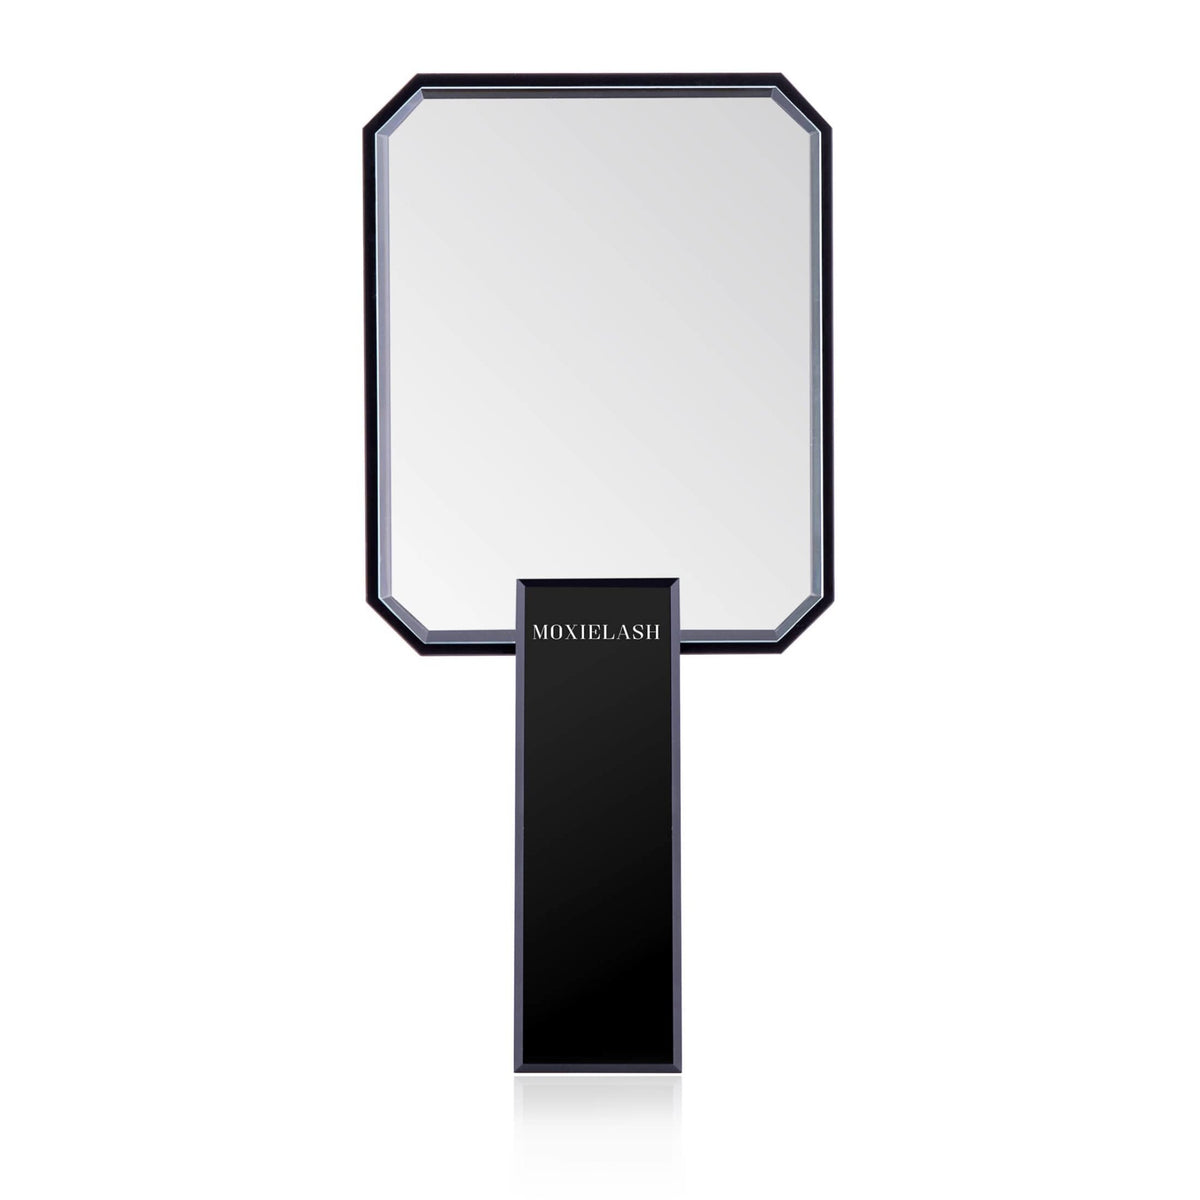 CHANEL Vip gift Beauty Makeup Mirror - Limited Edition - Black